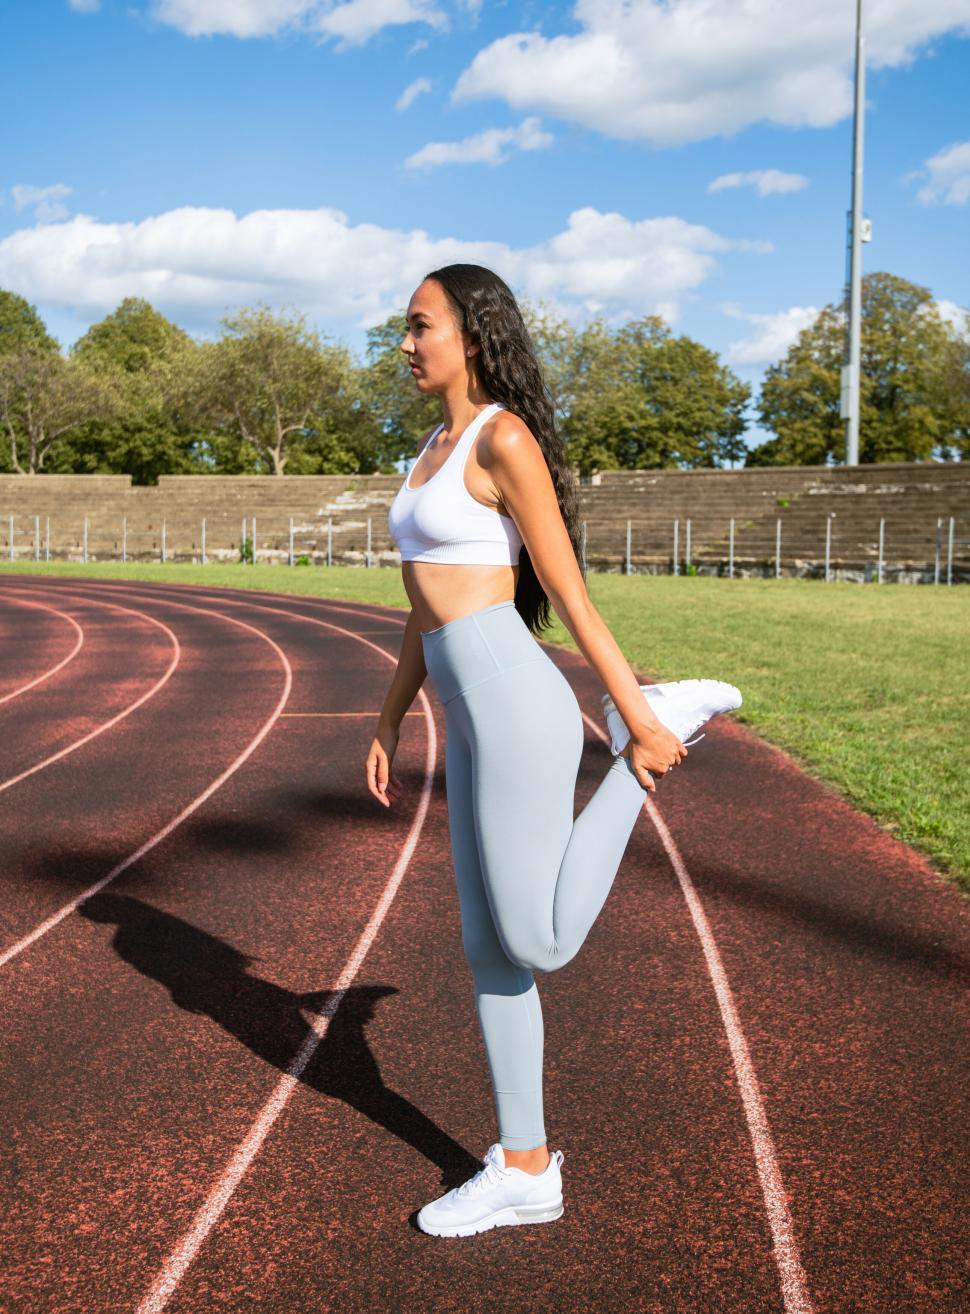 Free Image of Athlete stretching on a sunny track field 